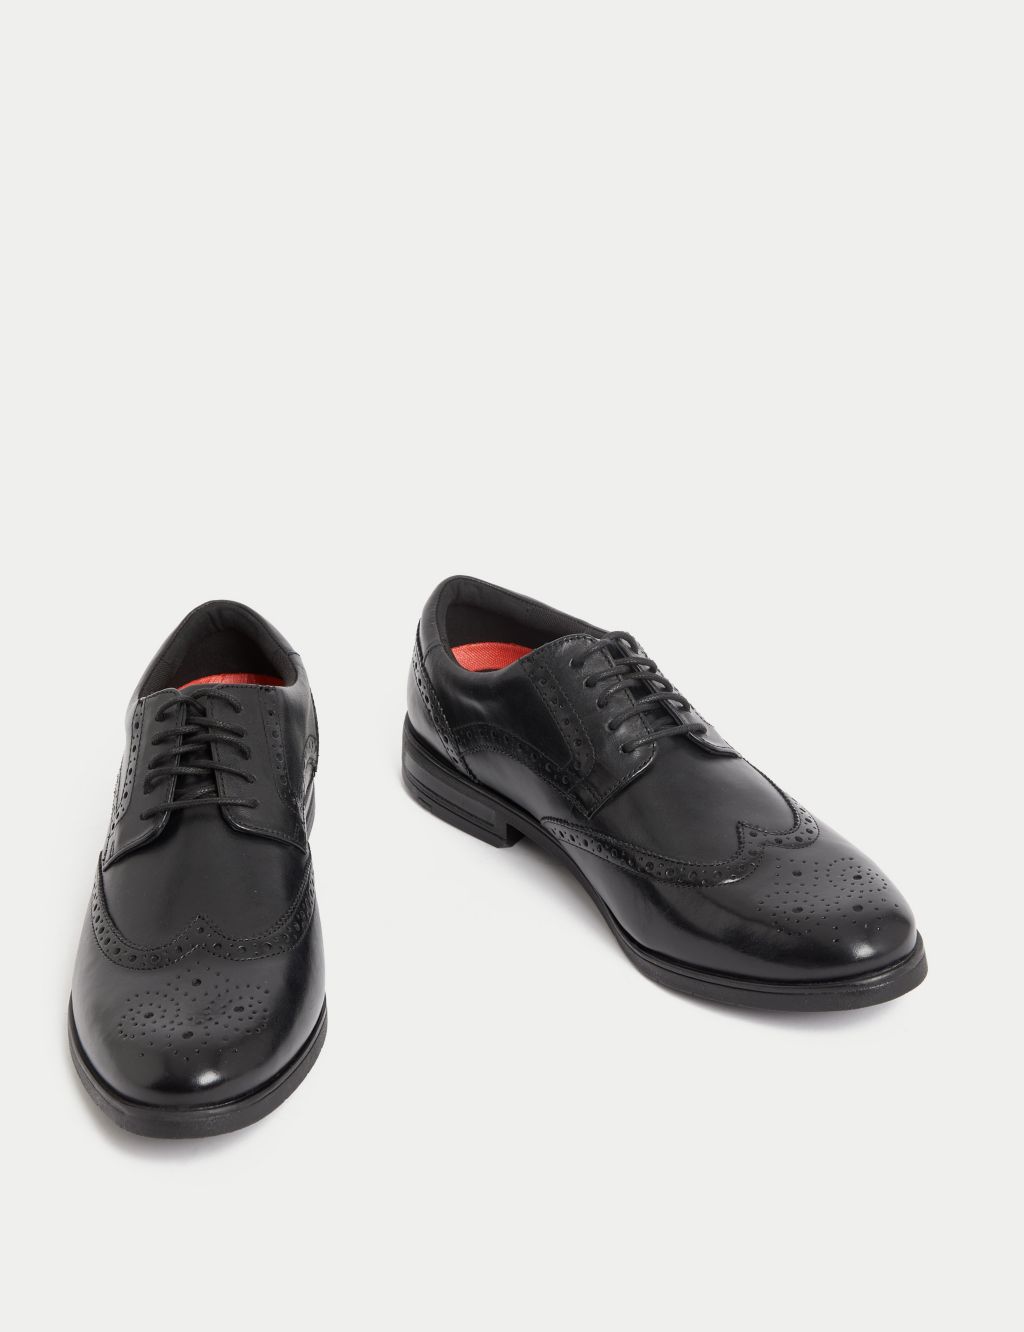 Airflex™ Leather Brogues image 1